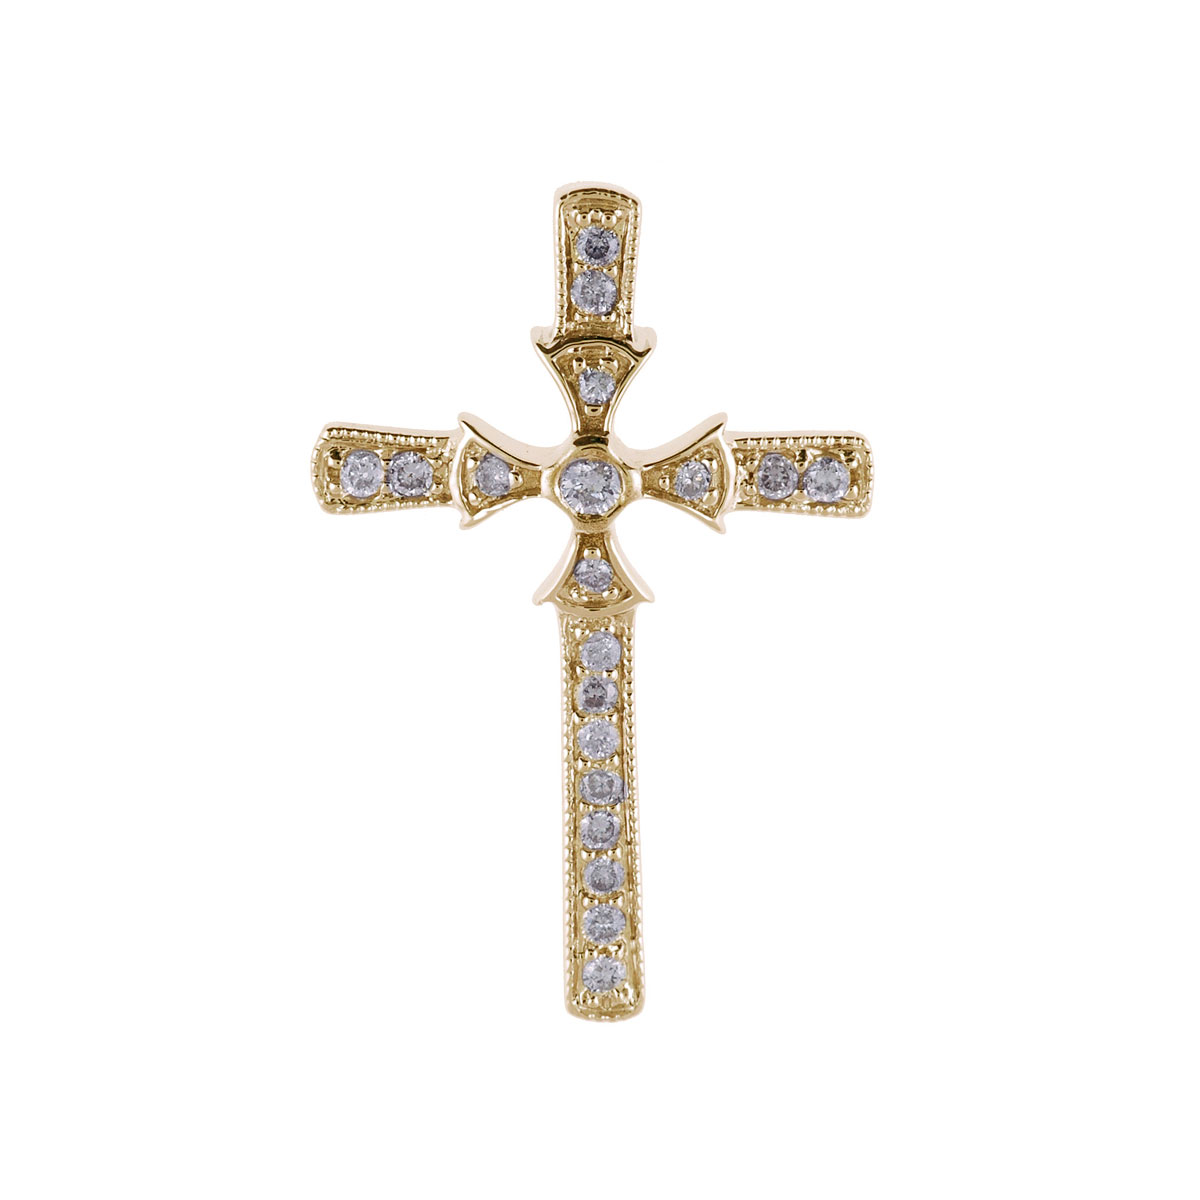 JCX2854: A simple and modern .20 ct diamond cross in 14k yellow gold.